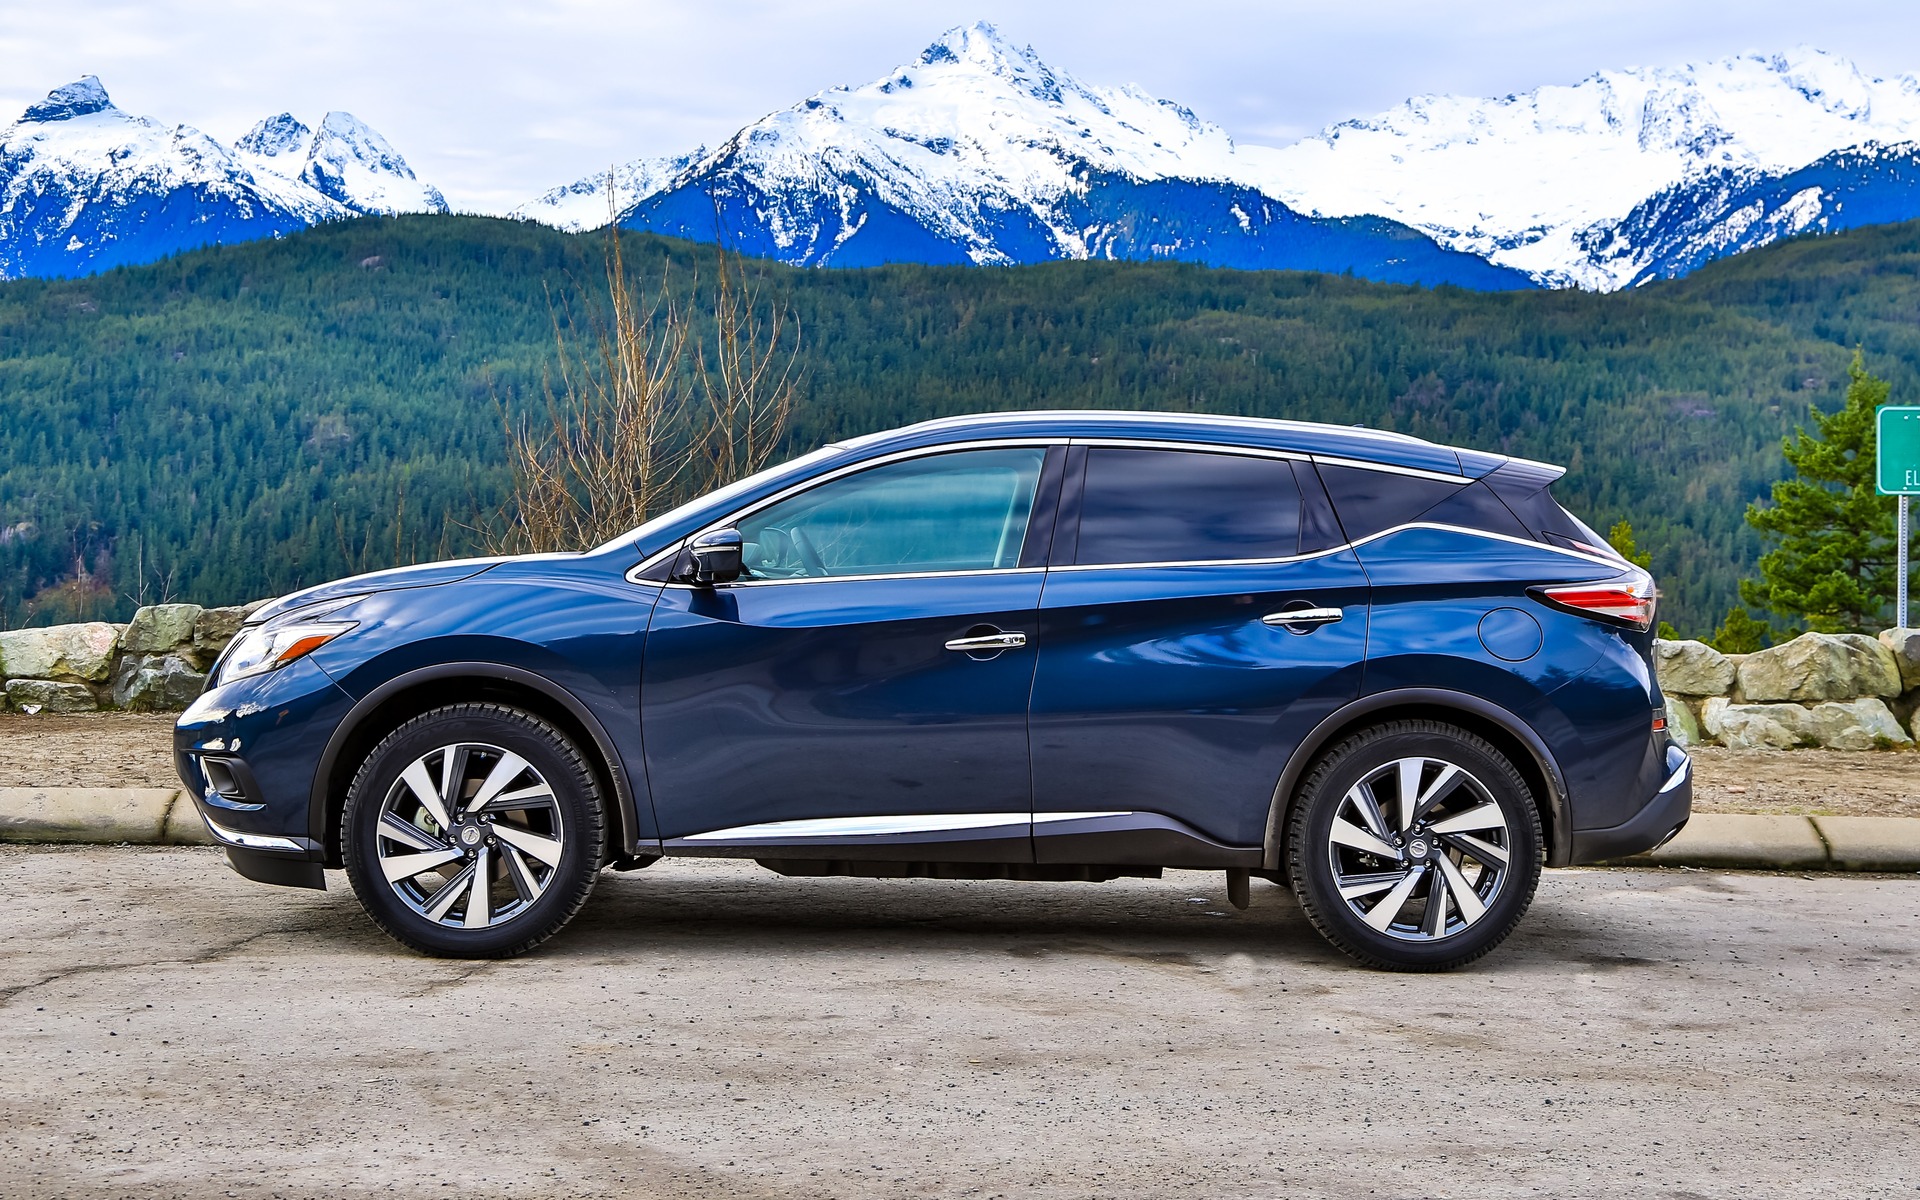 Kudos to Nissan for daring to create a distinctly different SUV.